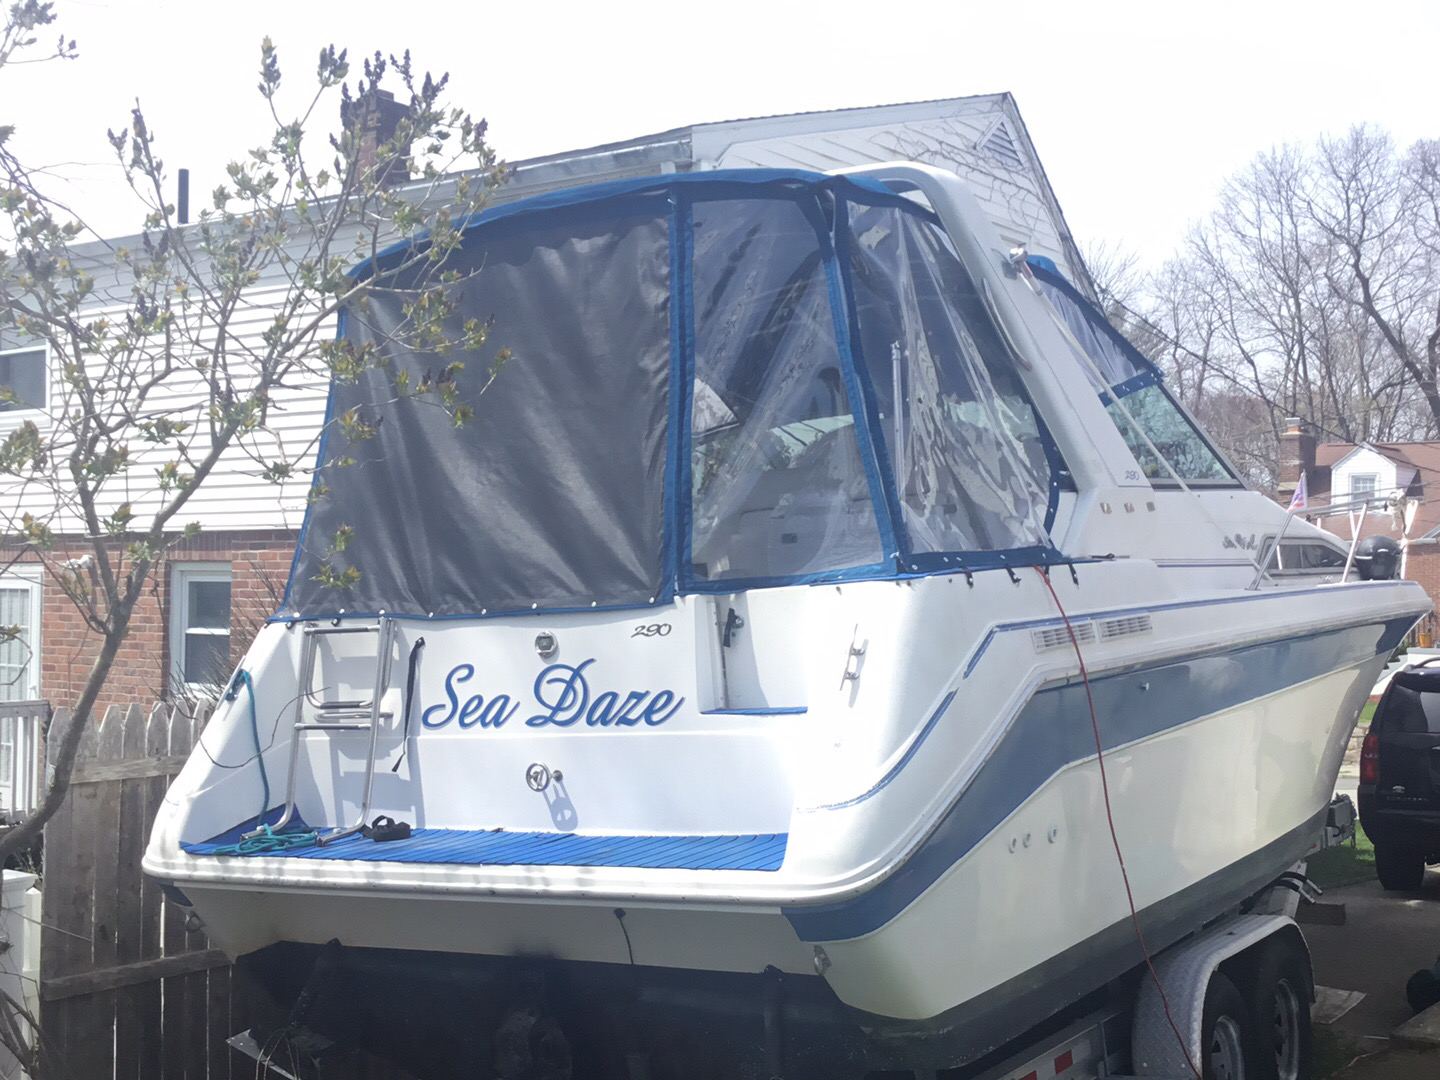 1993 30 foot Sea Ray Cabin CR Power boat for sale in New London, CT - image 4 